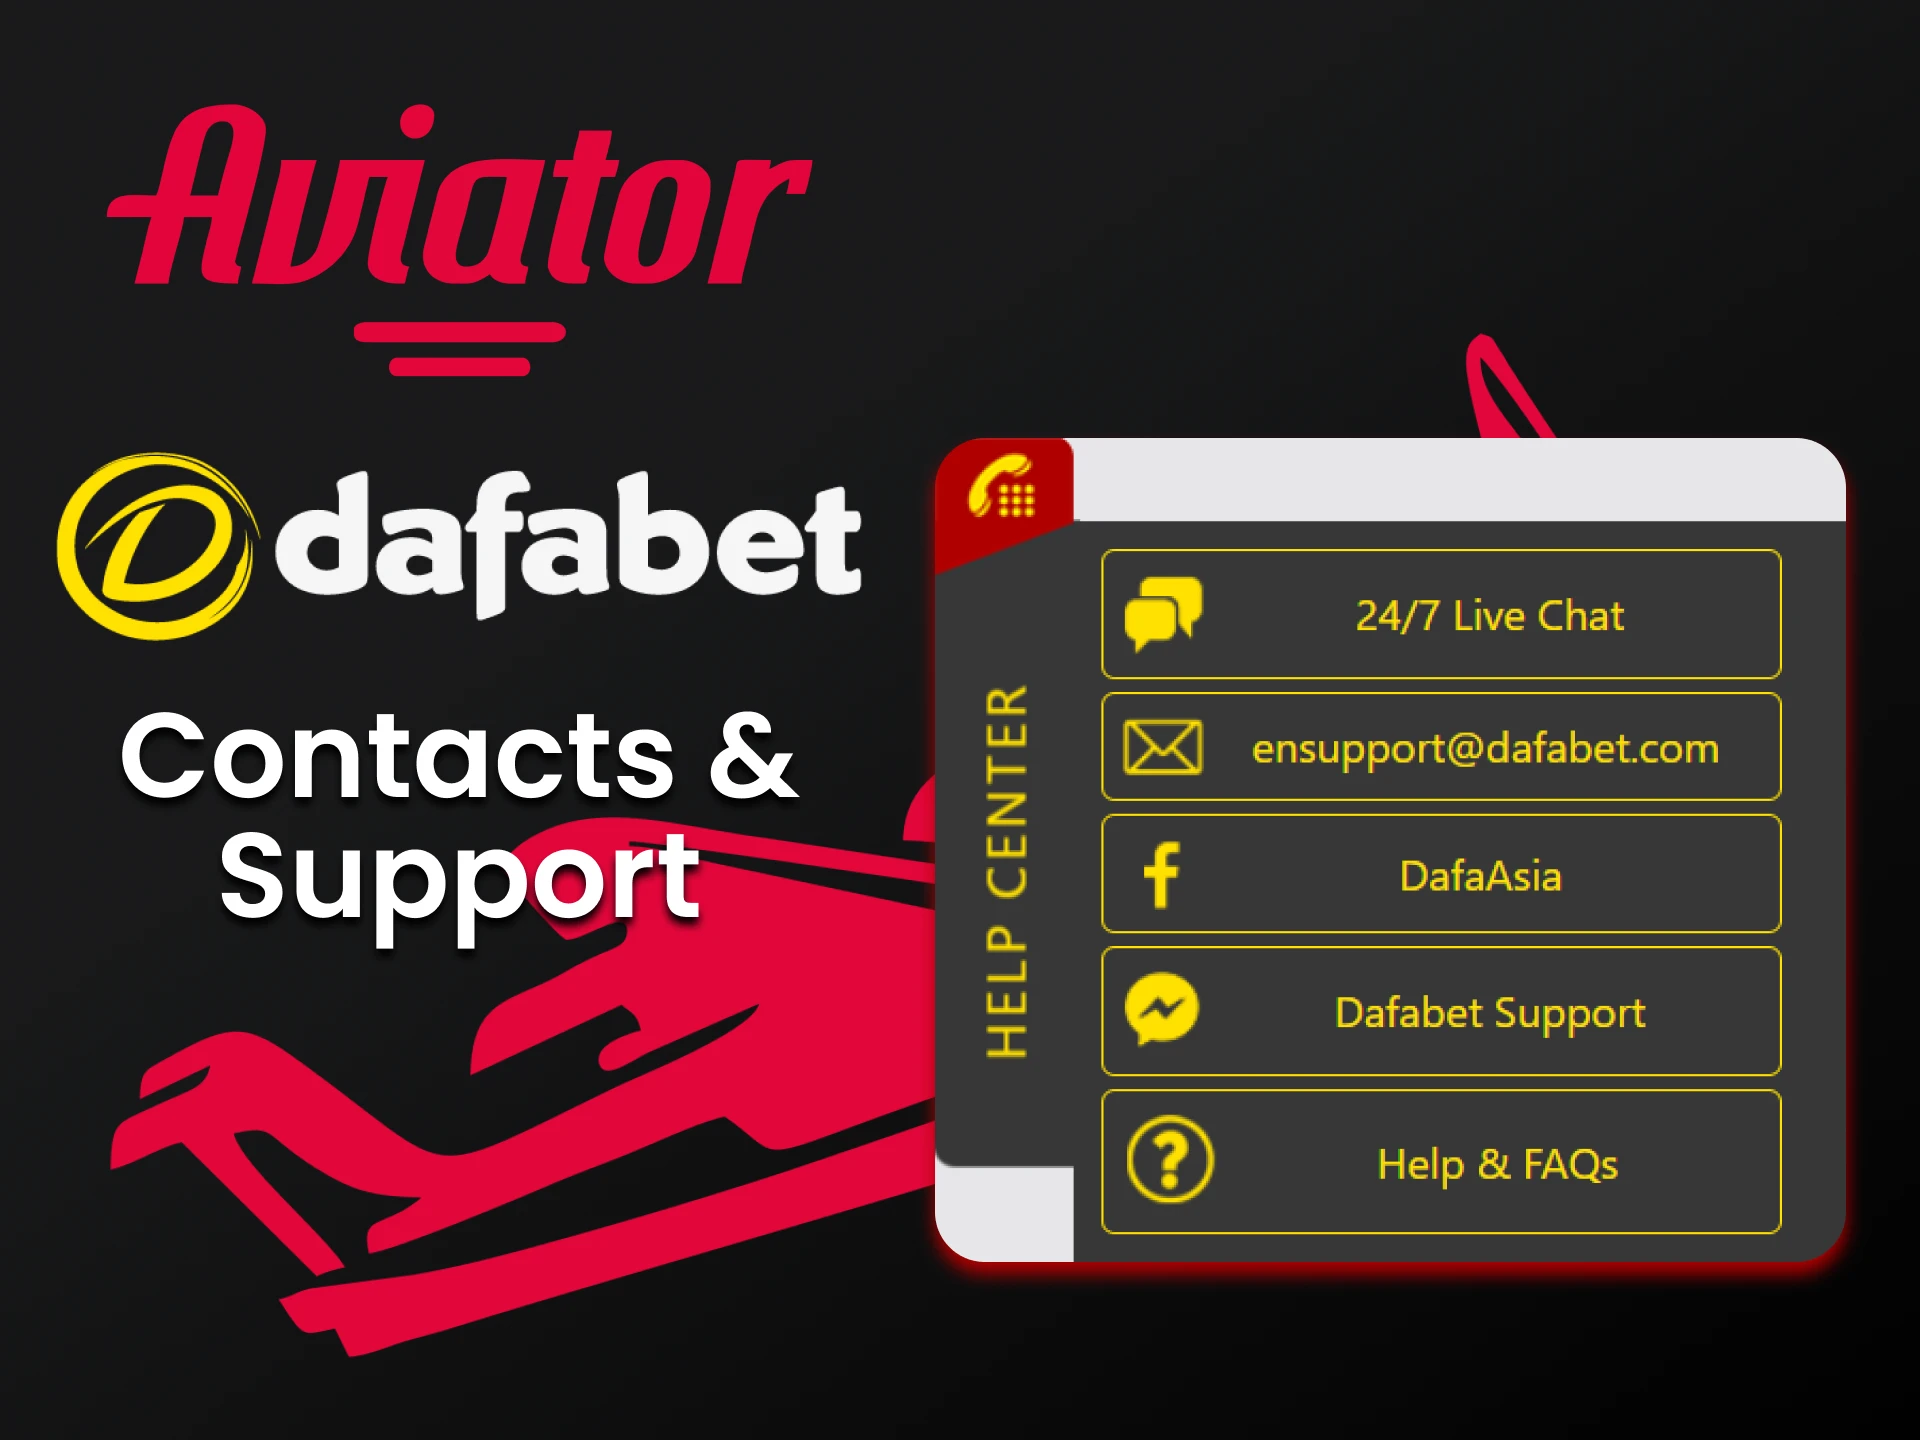 The Dafabet team will always help answer your questions.